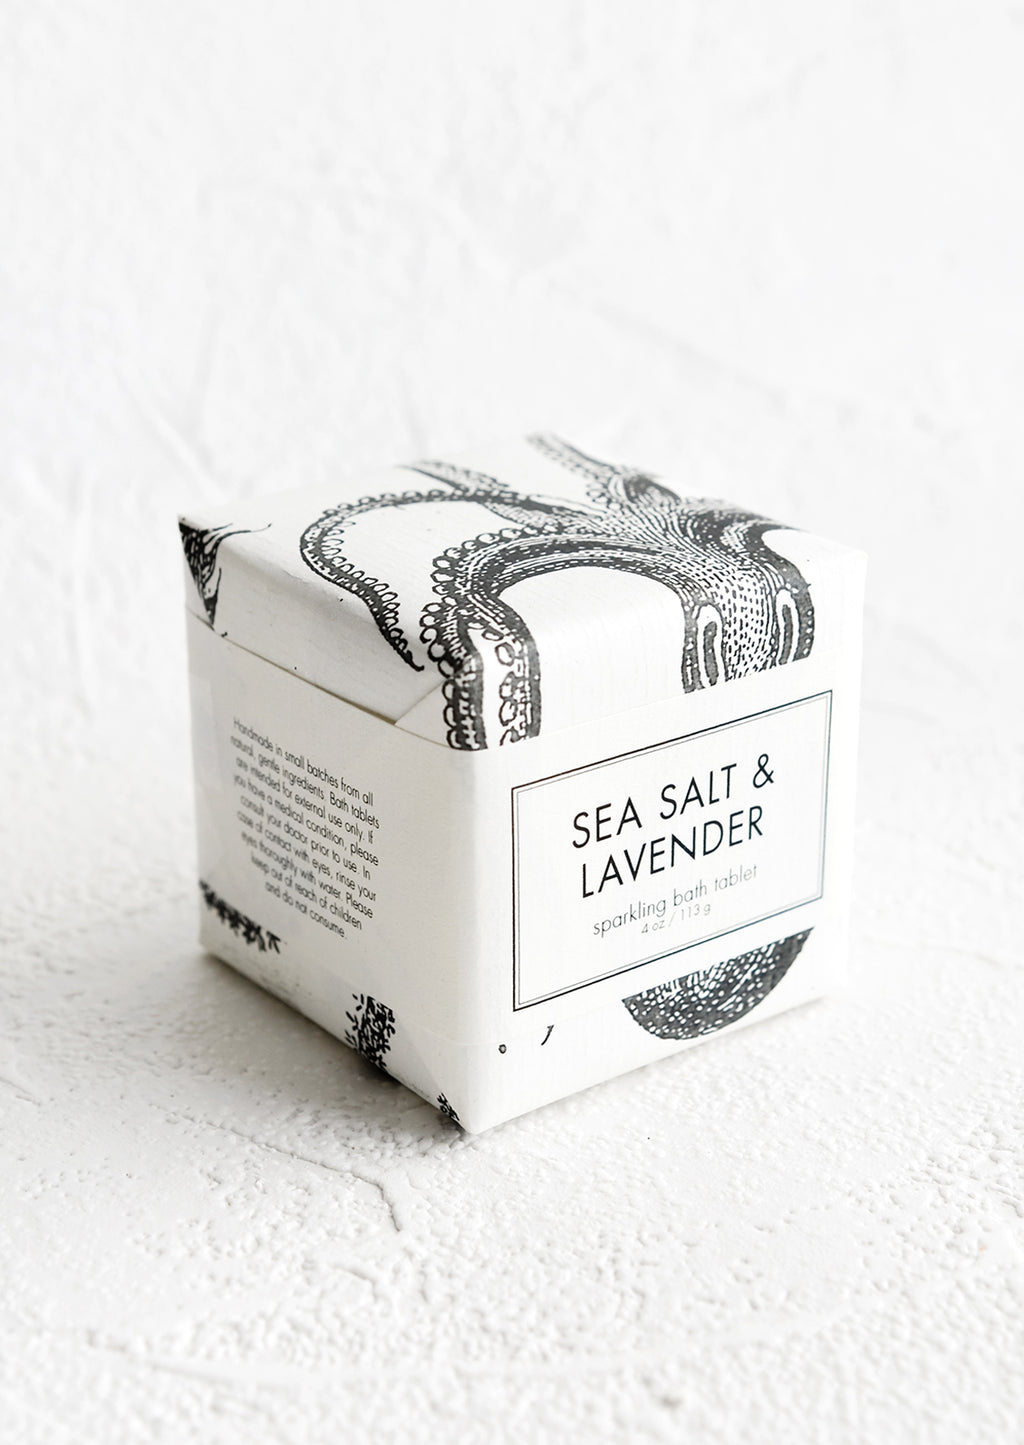 Sea Salt & Lavender: A cube-shaped bath fizzy box with black and white octopus graphic packaging.